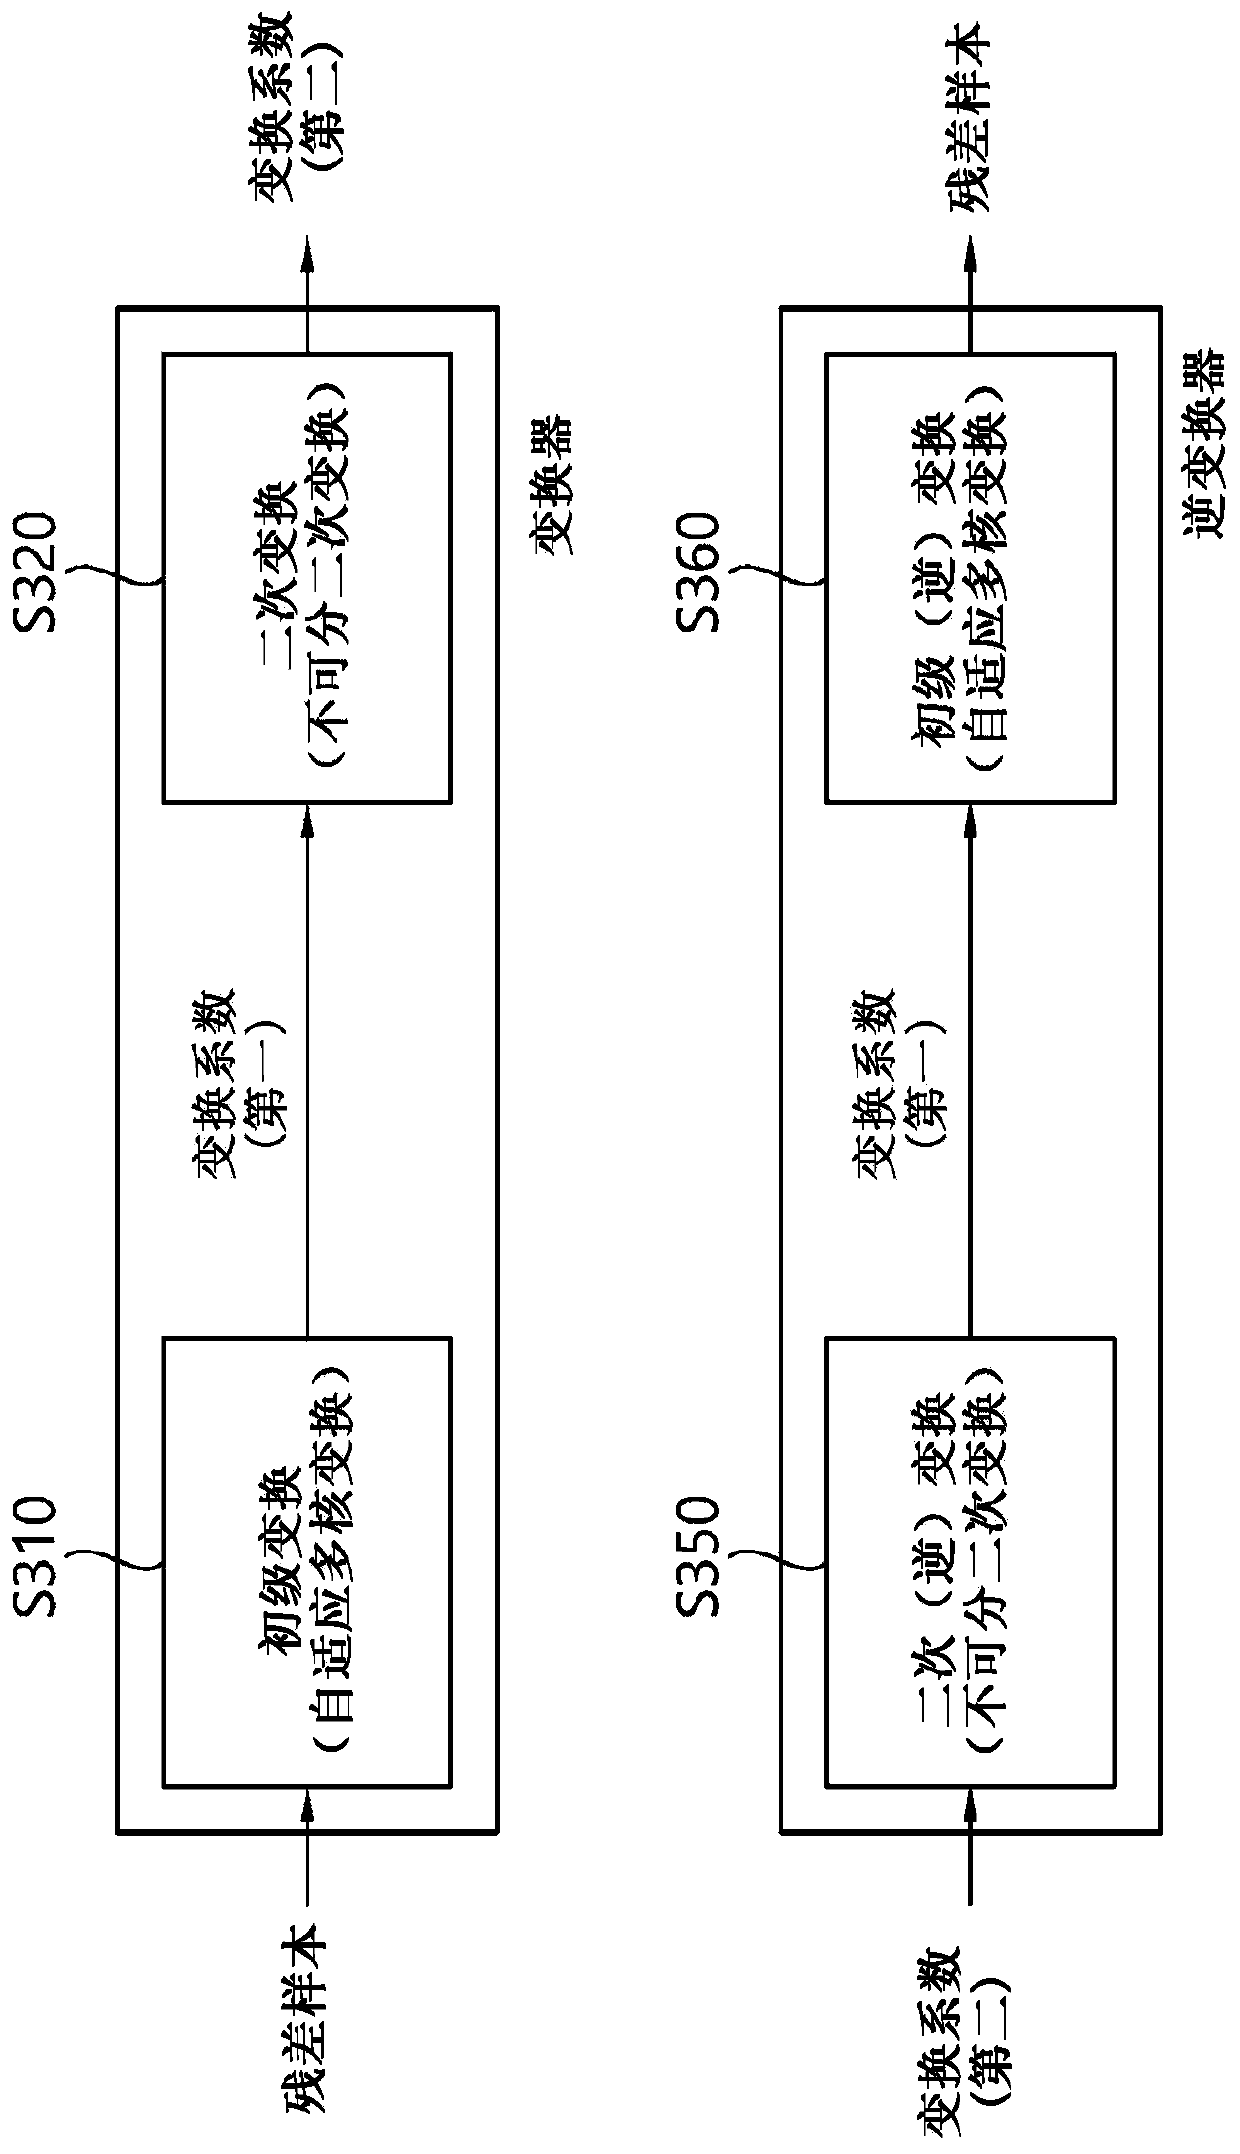 Transform method in image coding system and apparatus for same